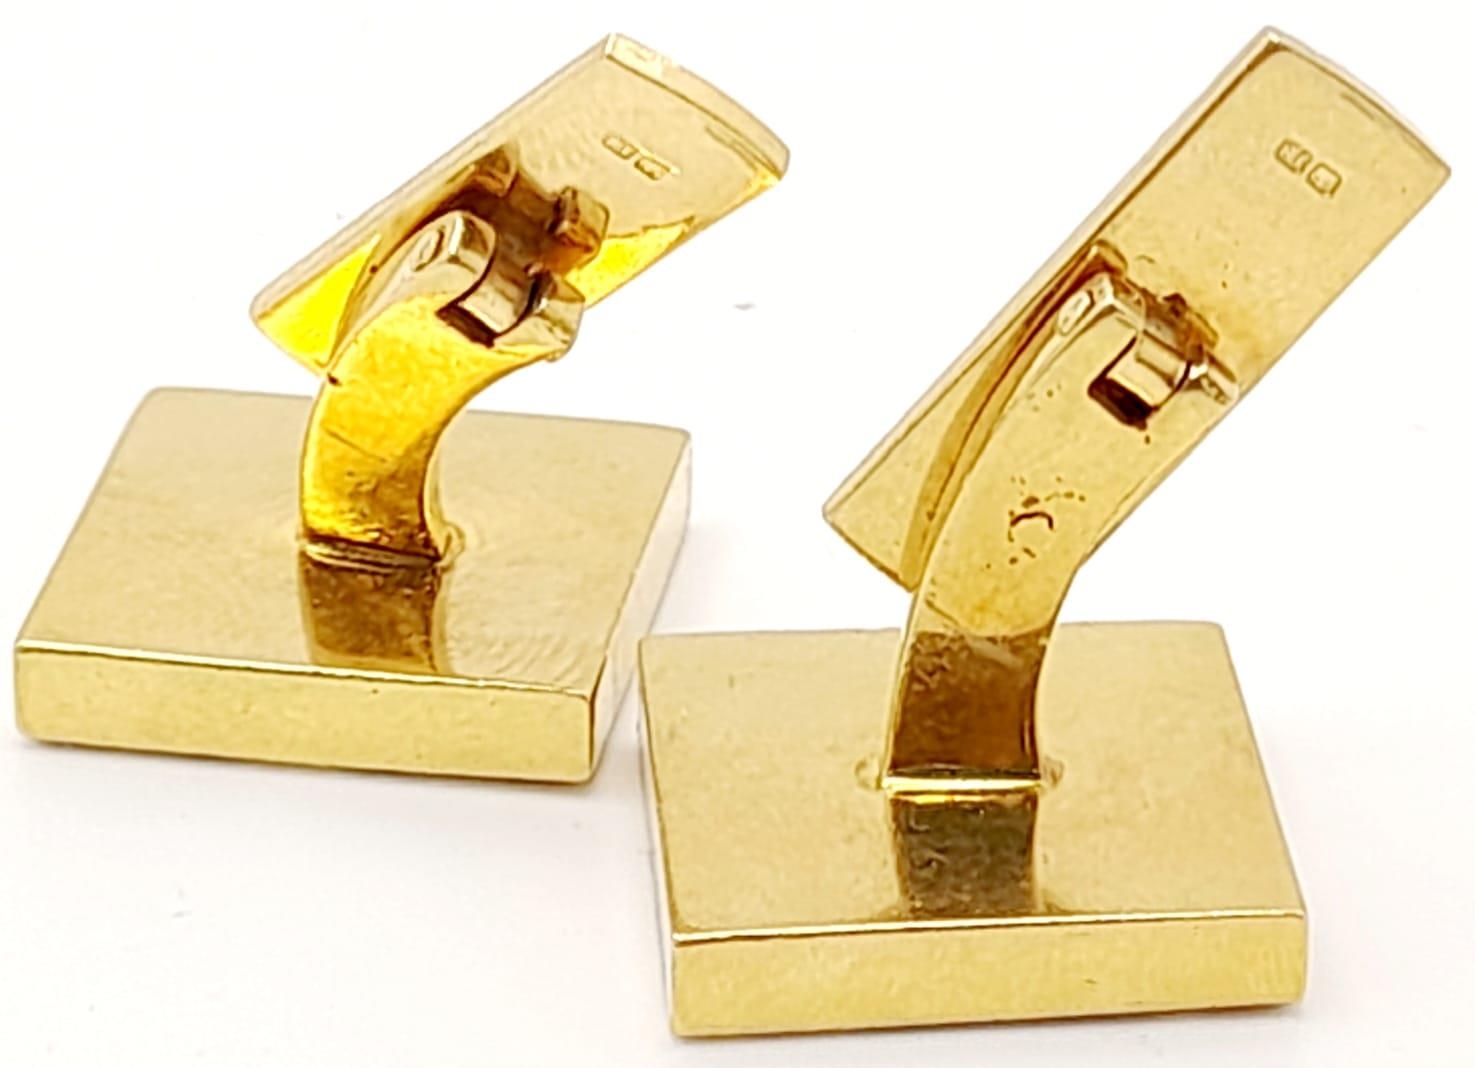 A PAIR OF 18K GOLD CARTIER STYLE CUFFLINKS WITH U.K. HALLMARK . 16.5gms - Image 4 of 6